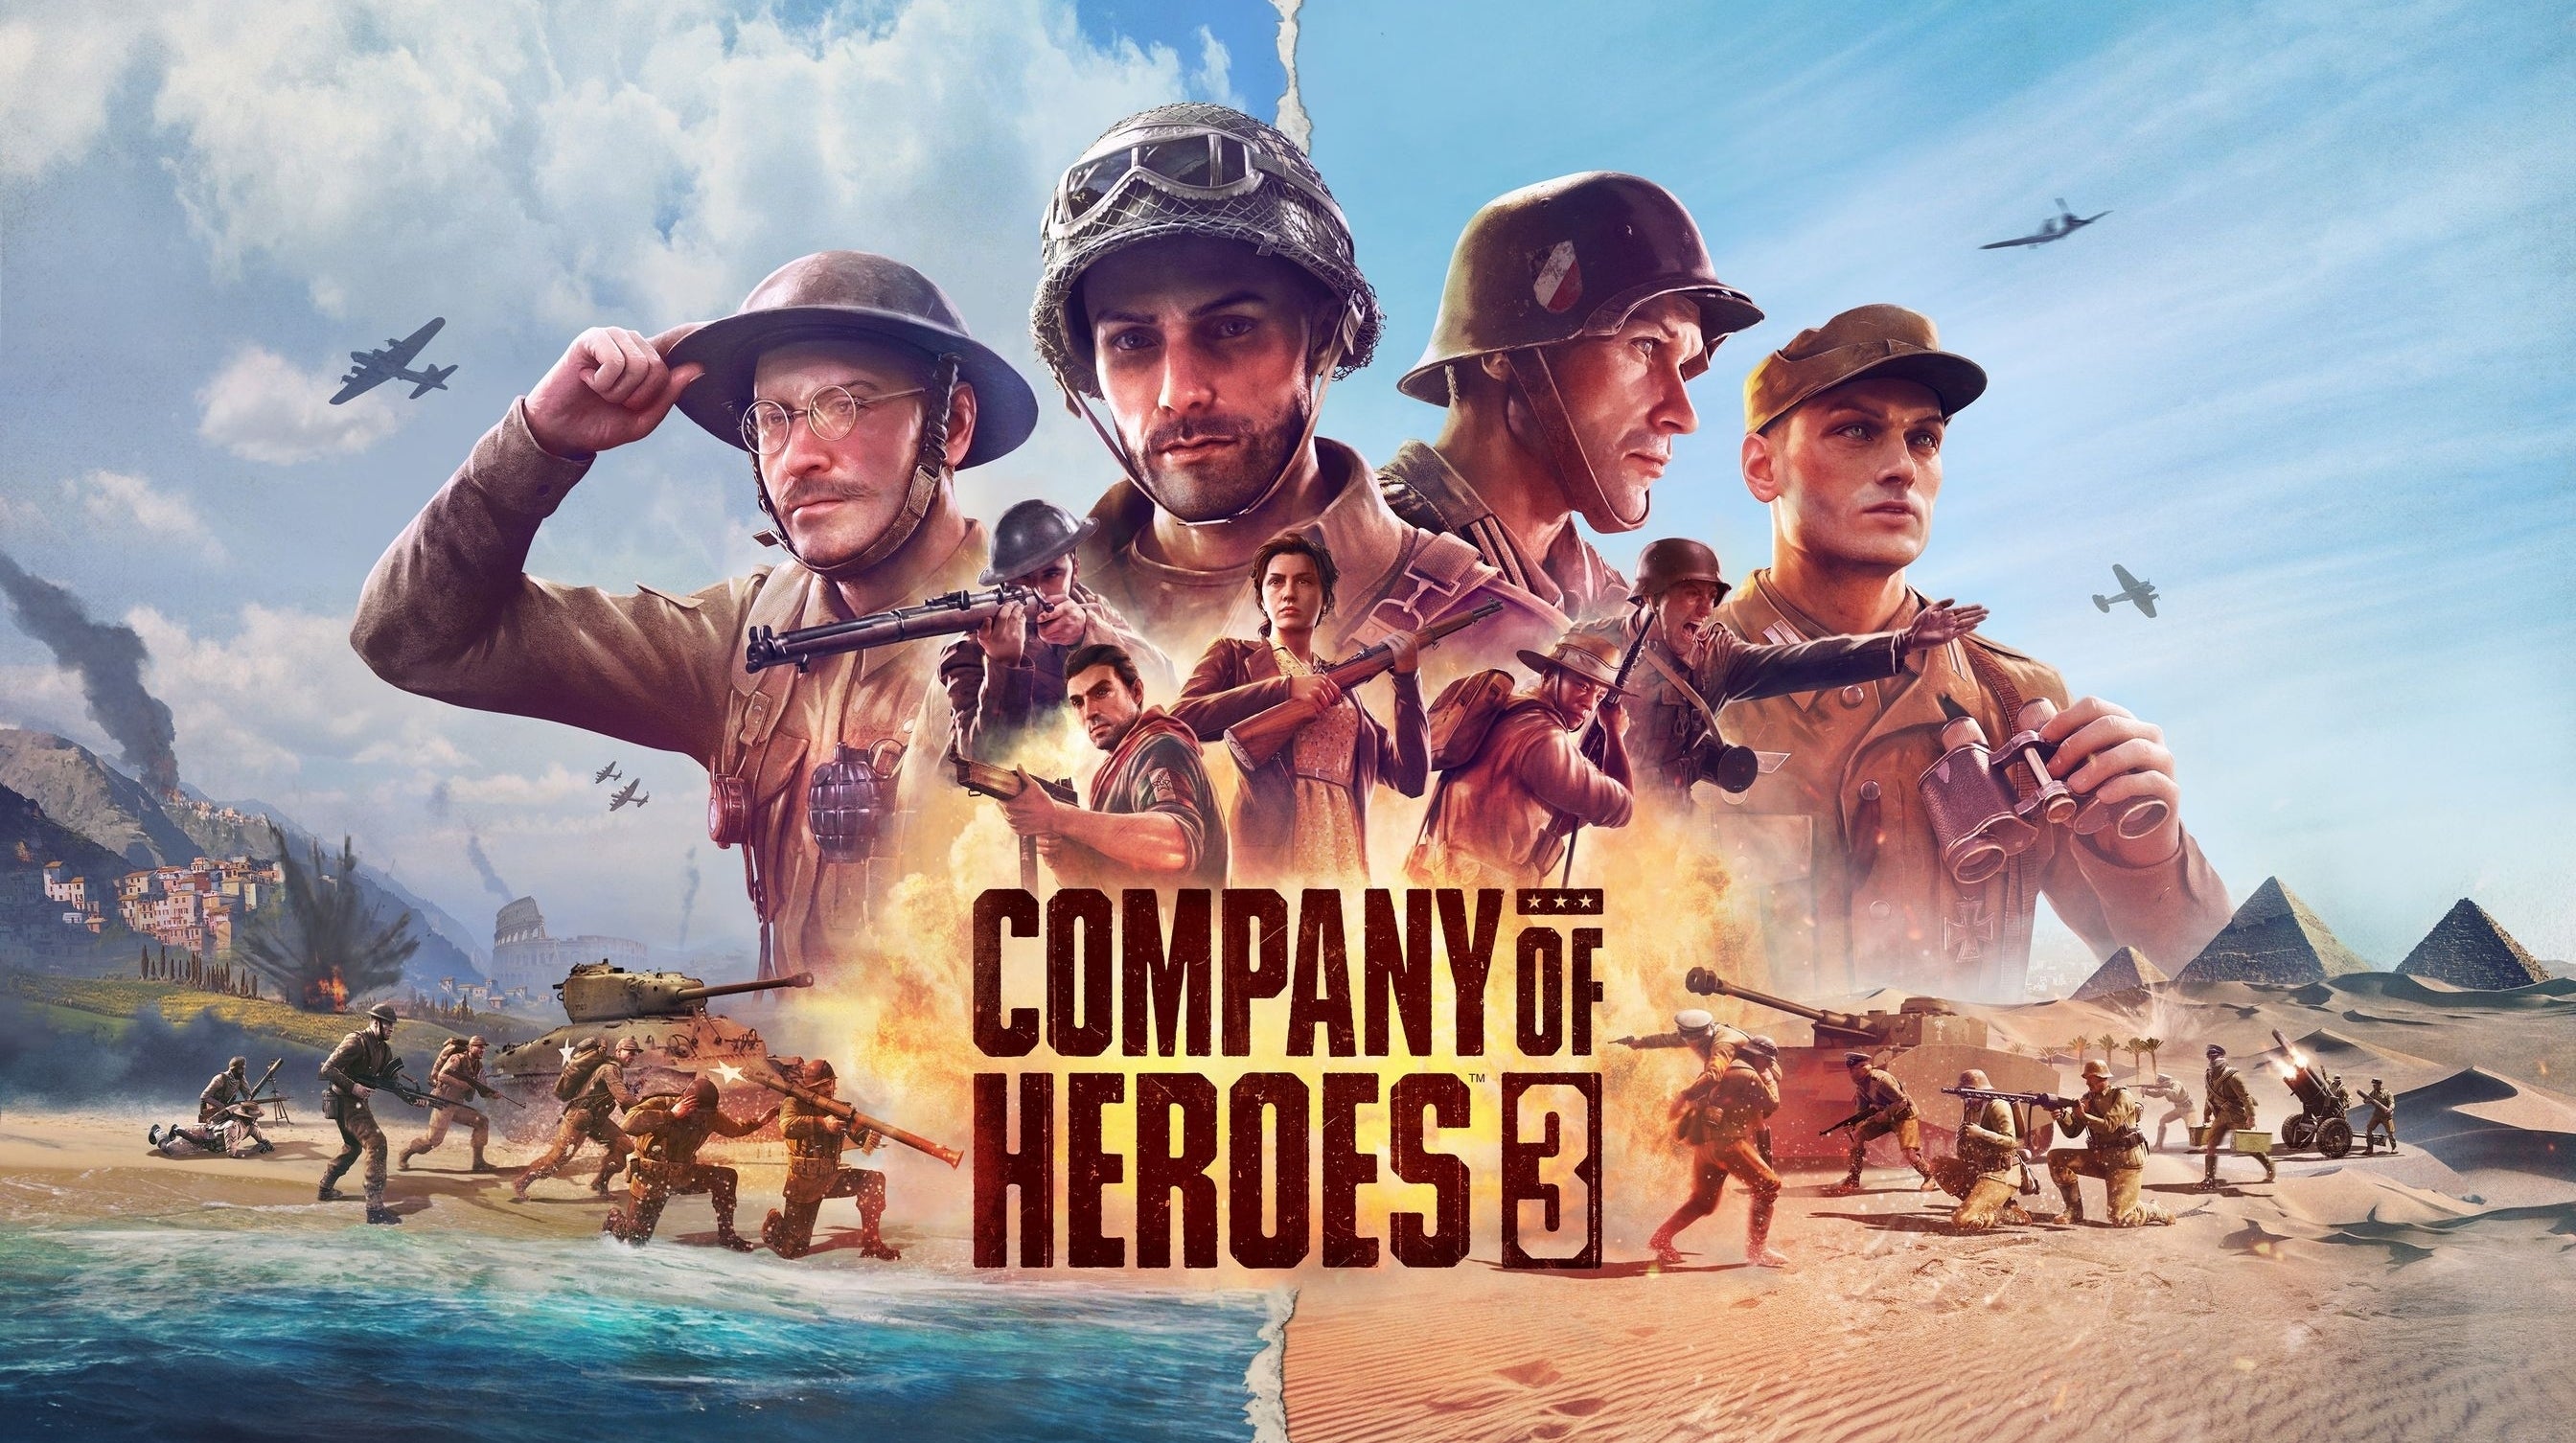 Company of Heroes 3 is coming - and it feels like the original, but bigger  | Eurogamer.net